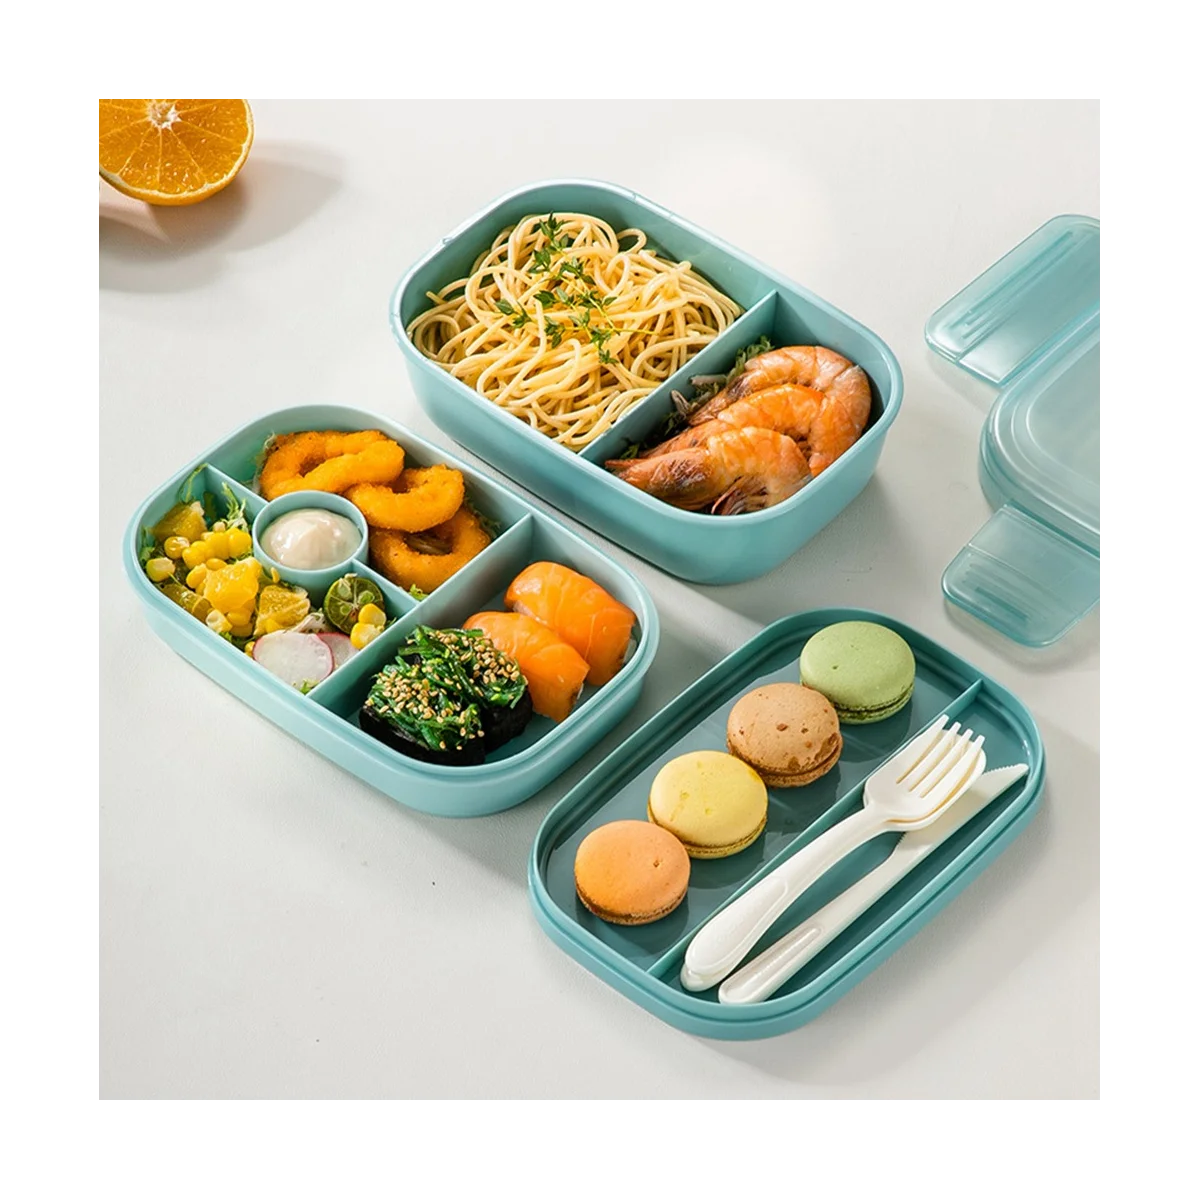 https://ae01.alicdn.com/kf/S163d25cb2b3749808d81e724558bb3928/Adult-Stackable-Bento-Lunch-Box-3-Layers-Leak-Proof-All-In-1-Bento-Box-Lunchbox-with.jpg